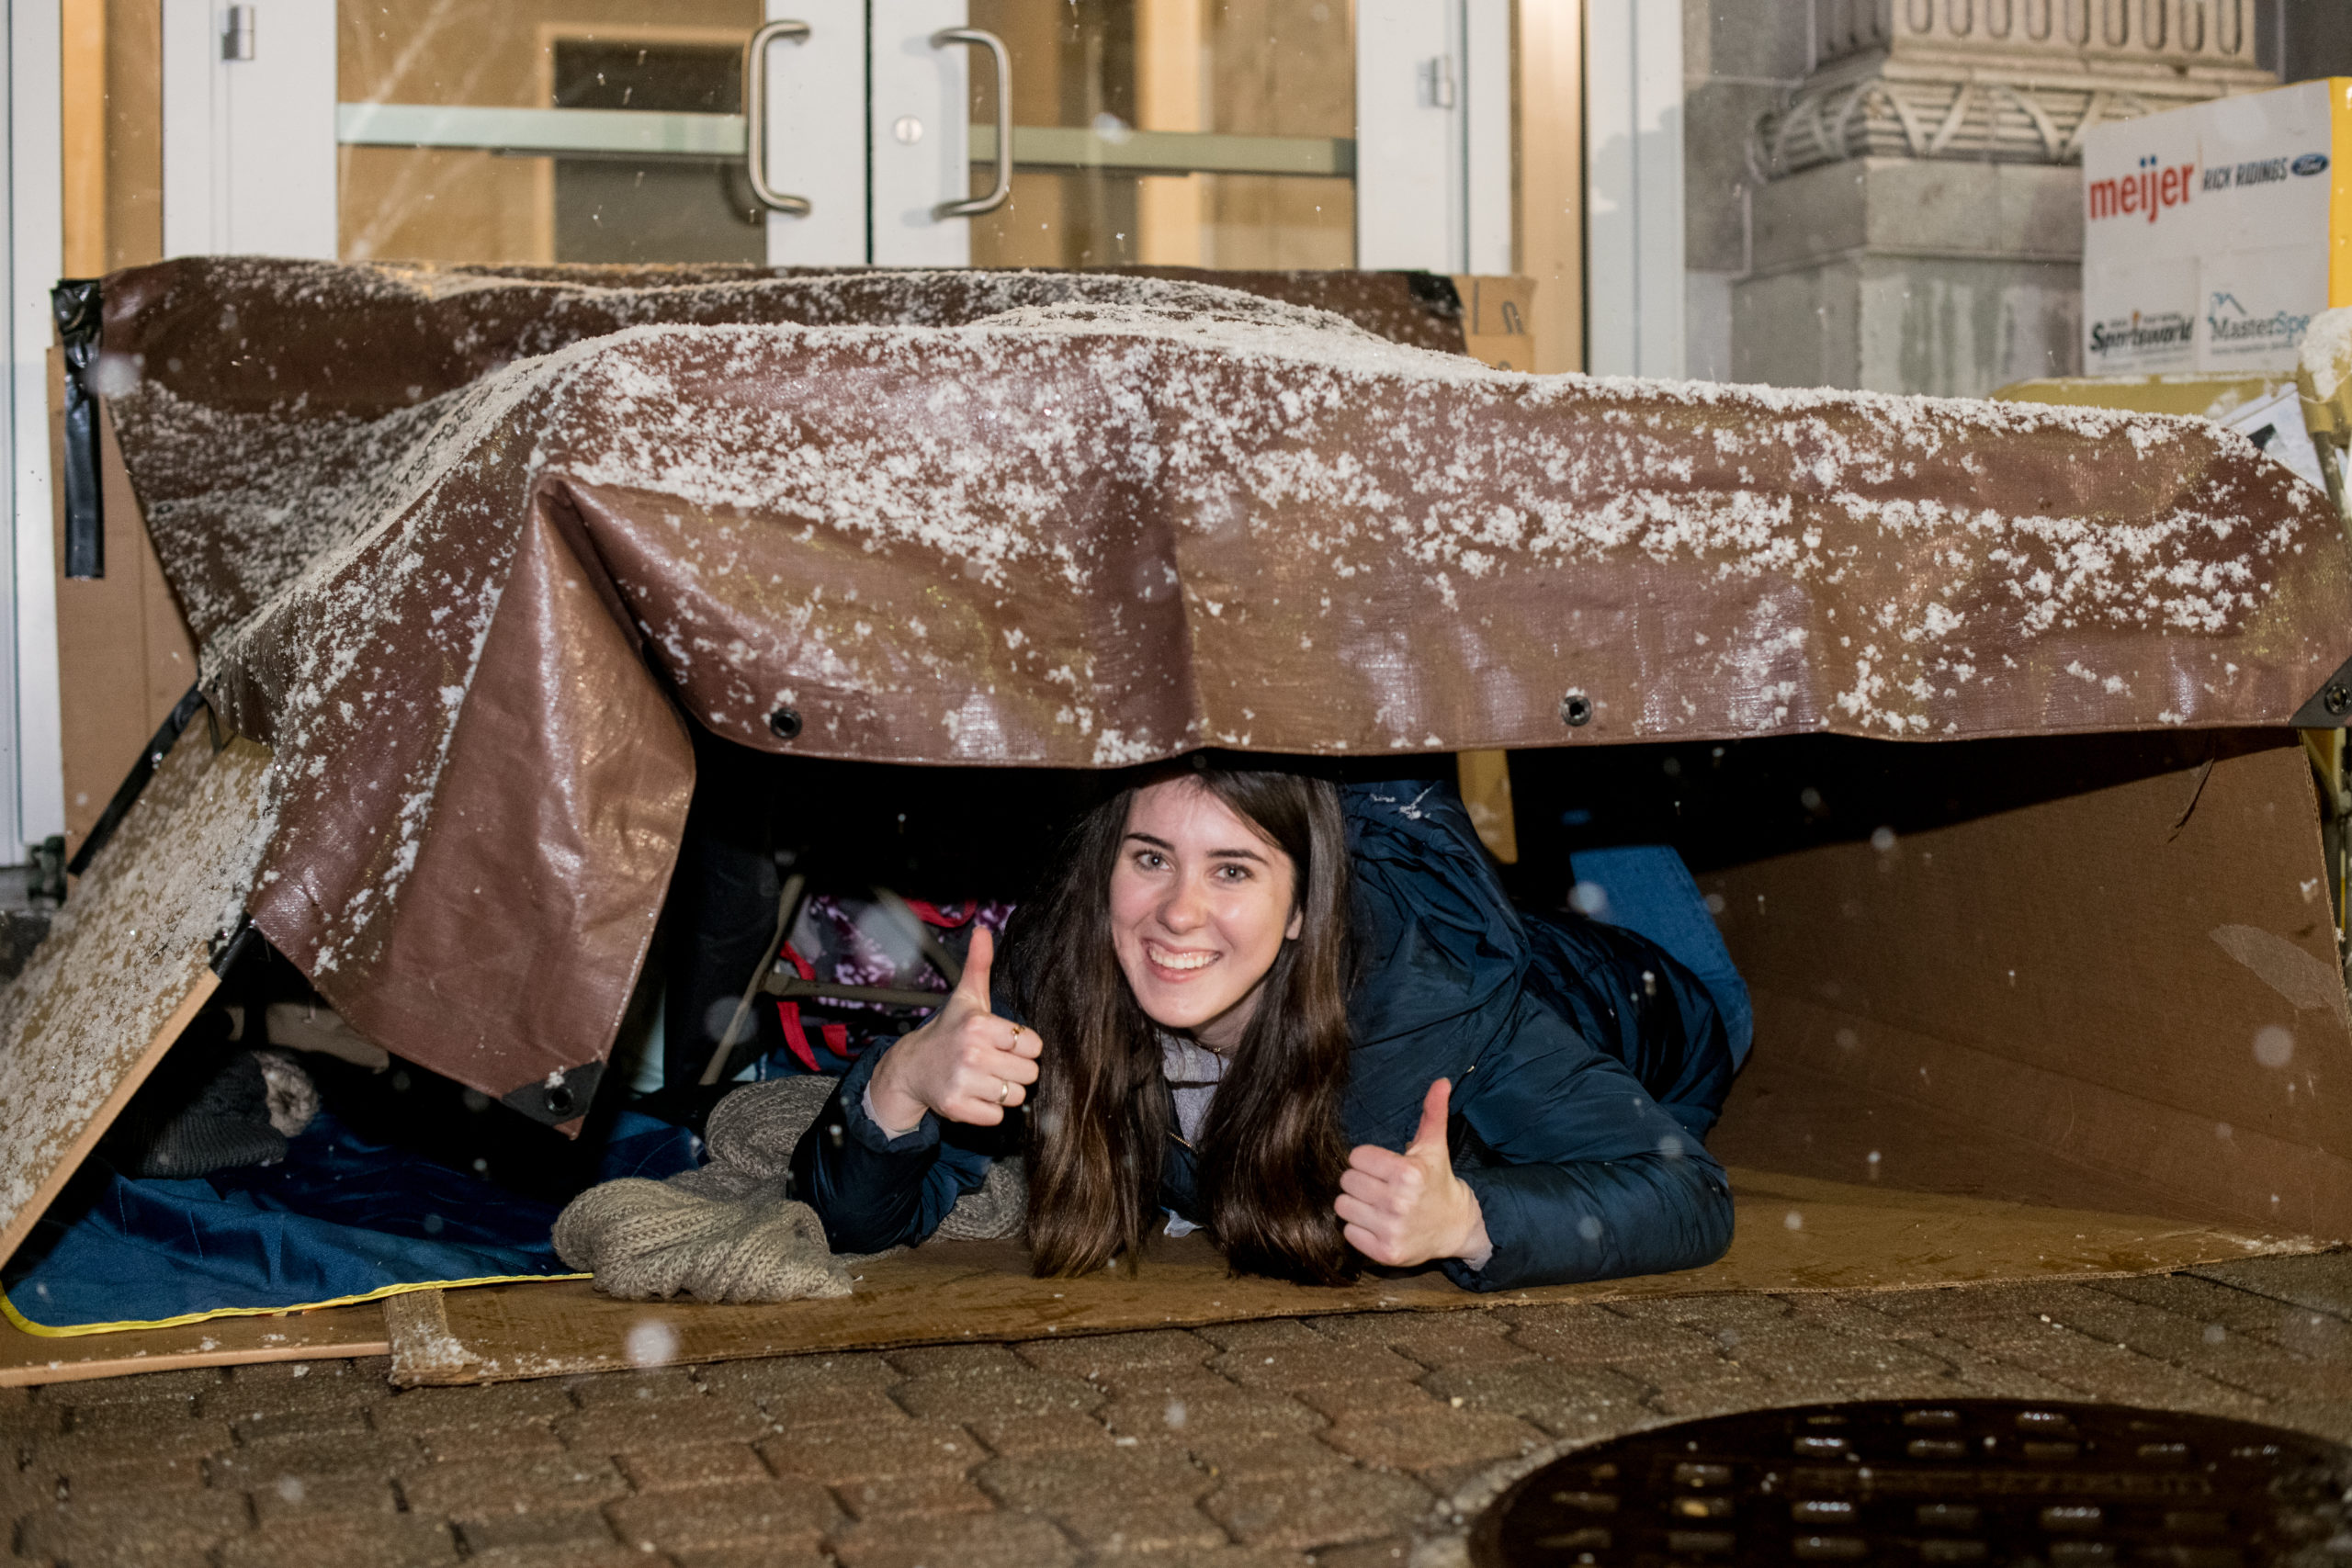 Sleeping Outside In A Cardboard Box: Raising Awareness For The Homeless image